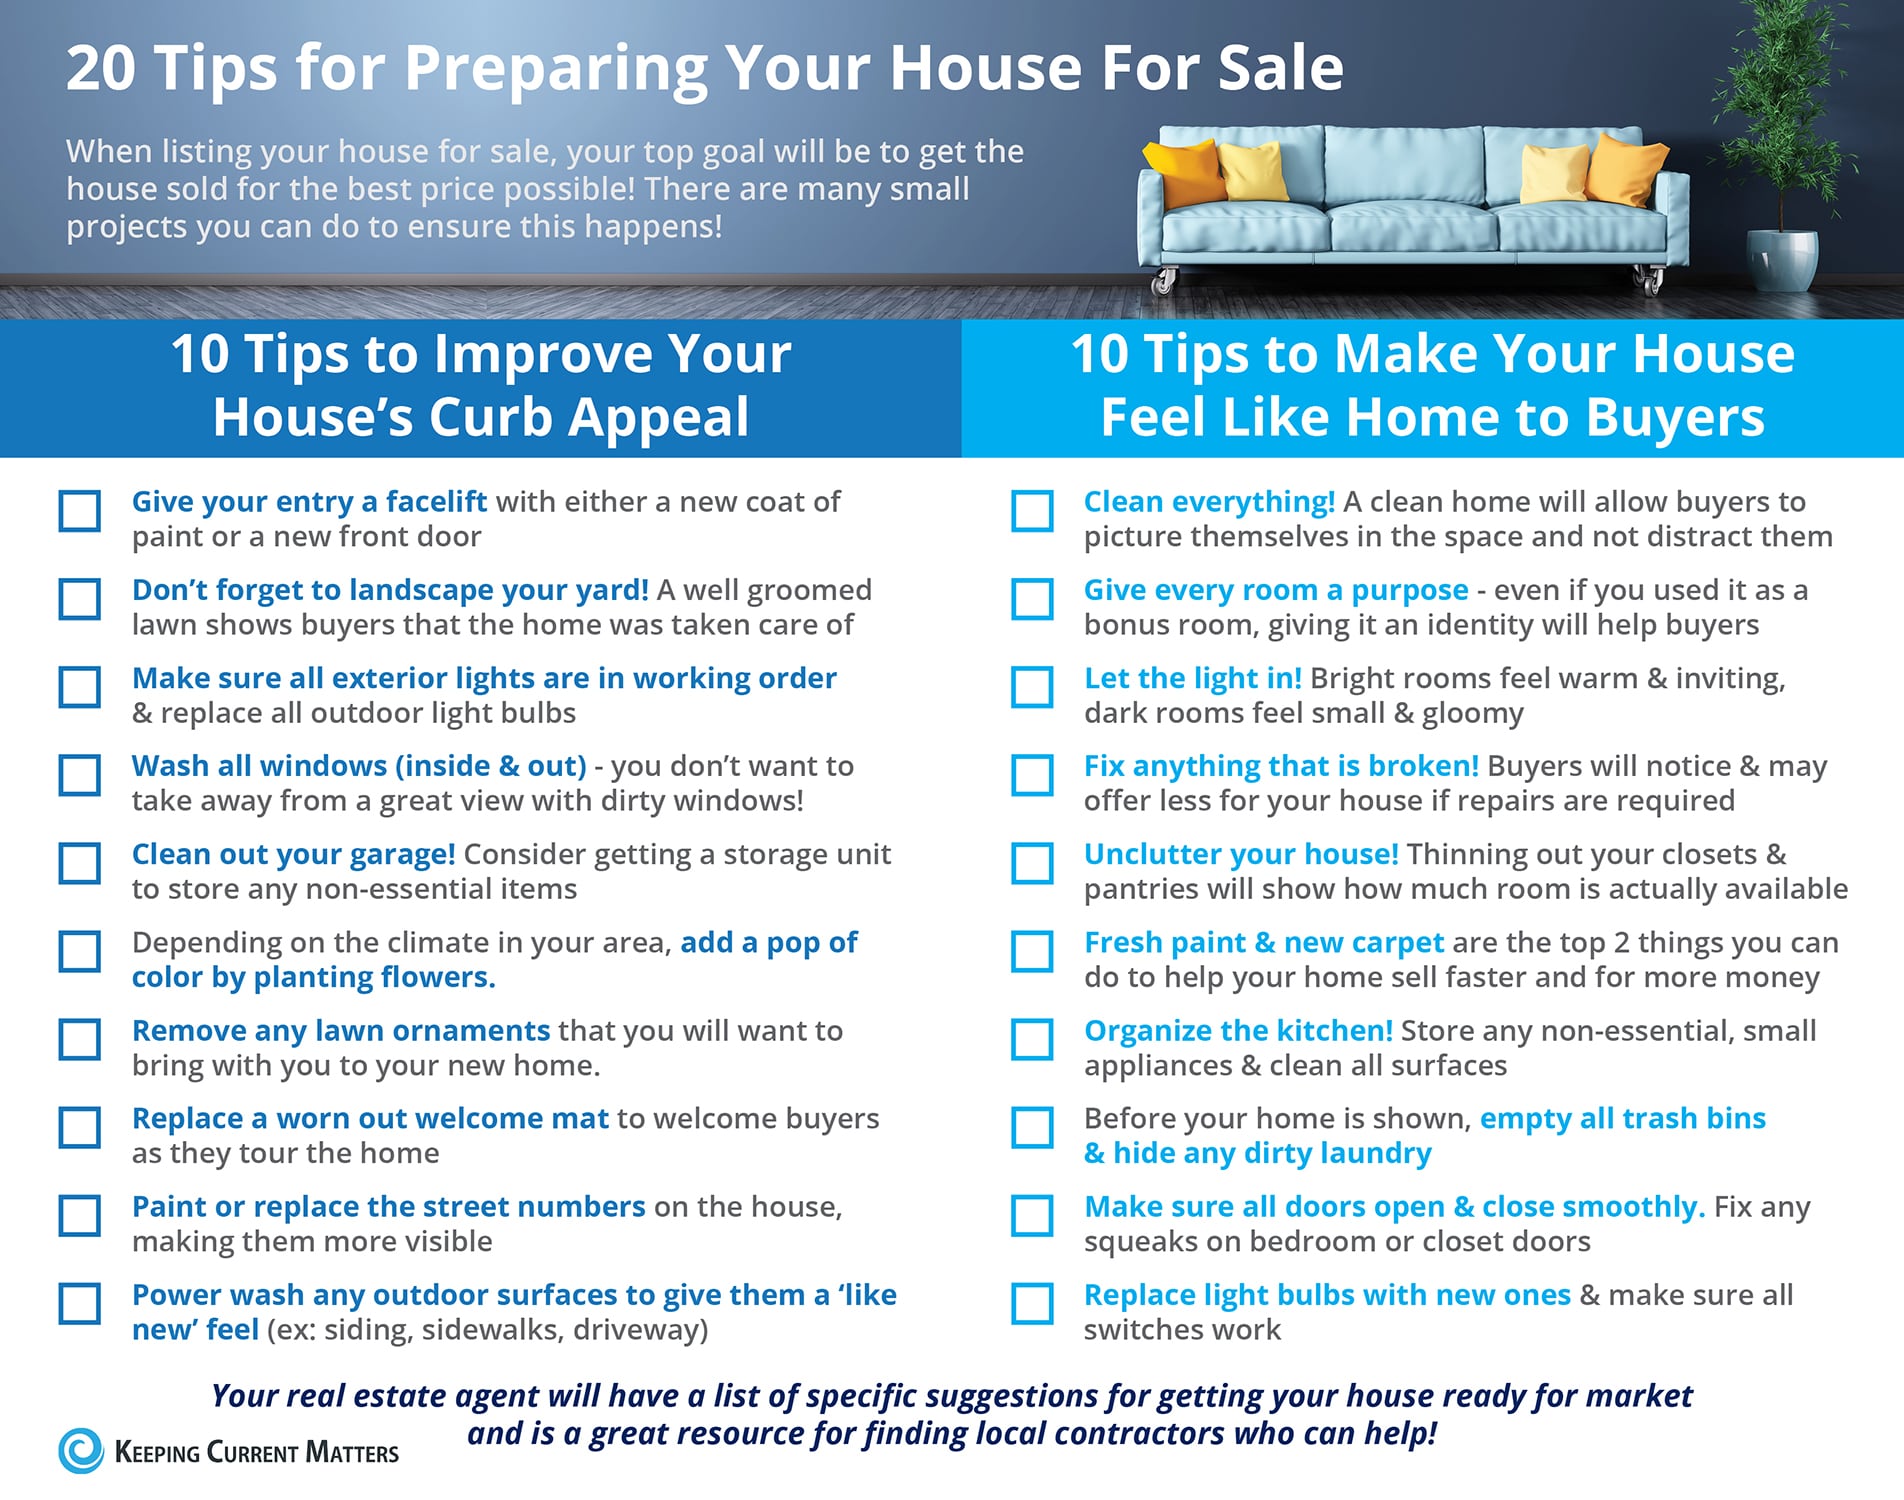 20 Tips for Preparing Your House for Sale